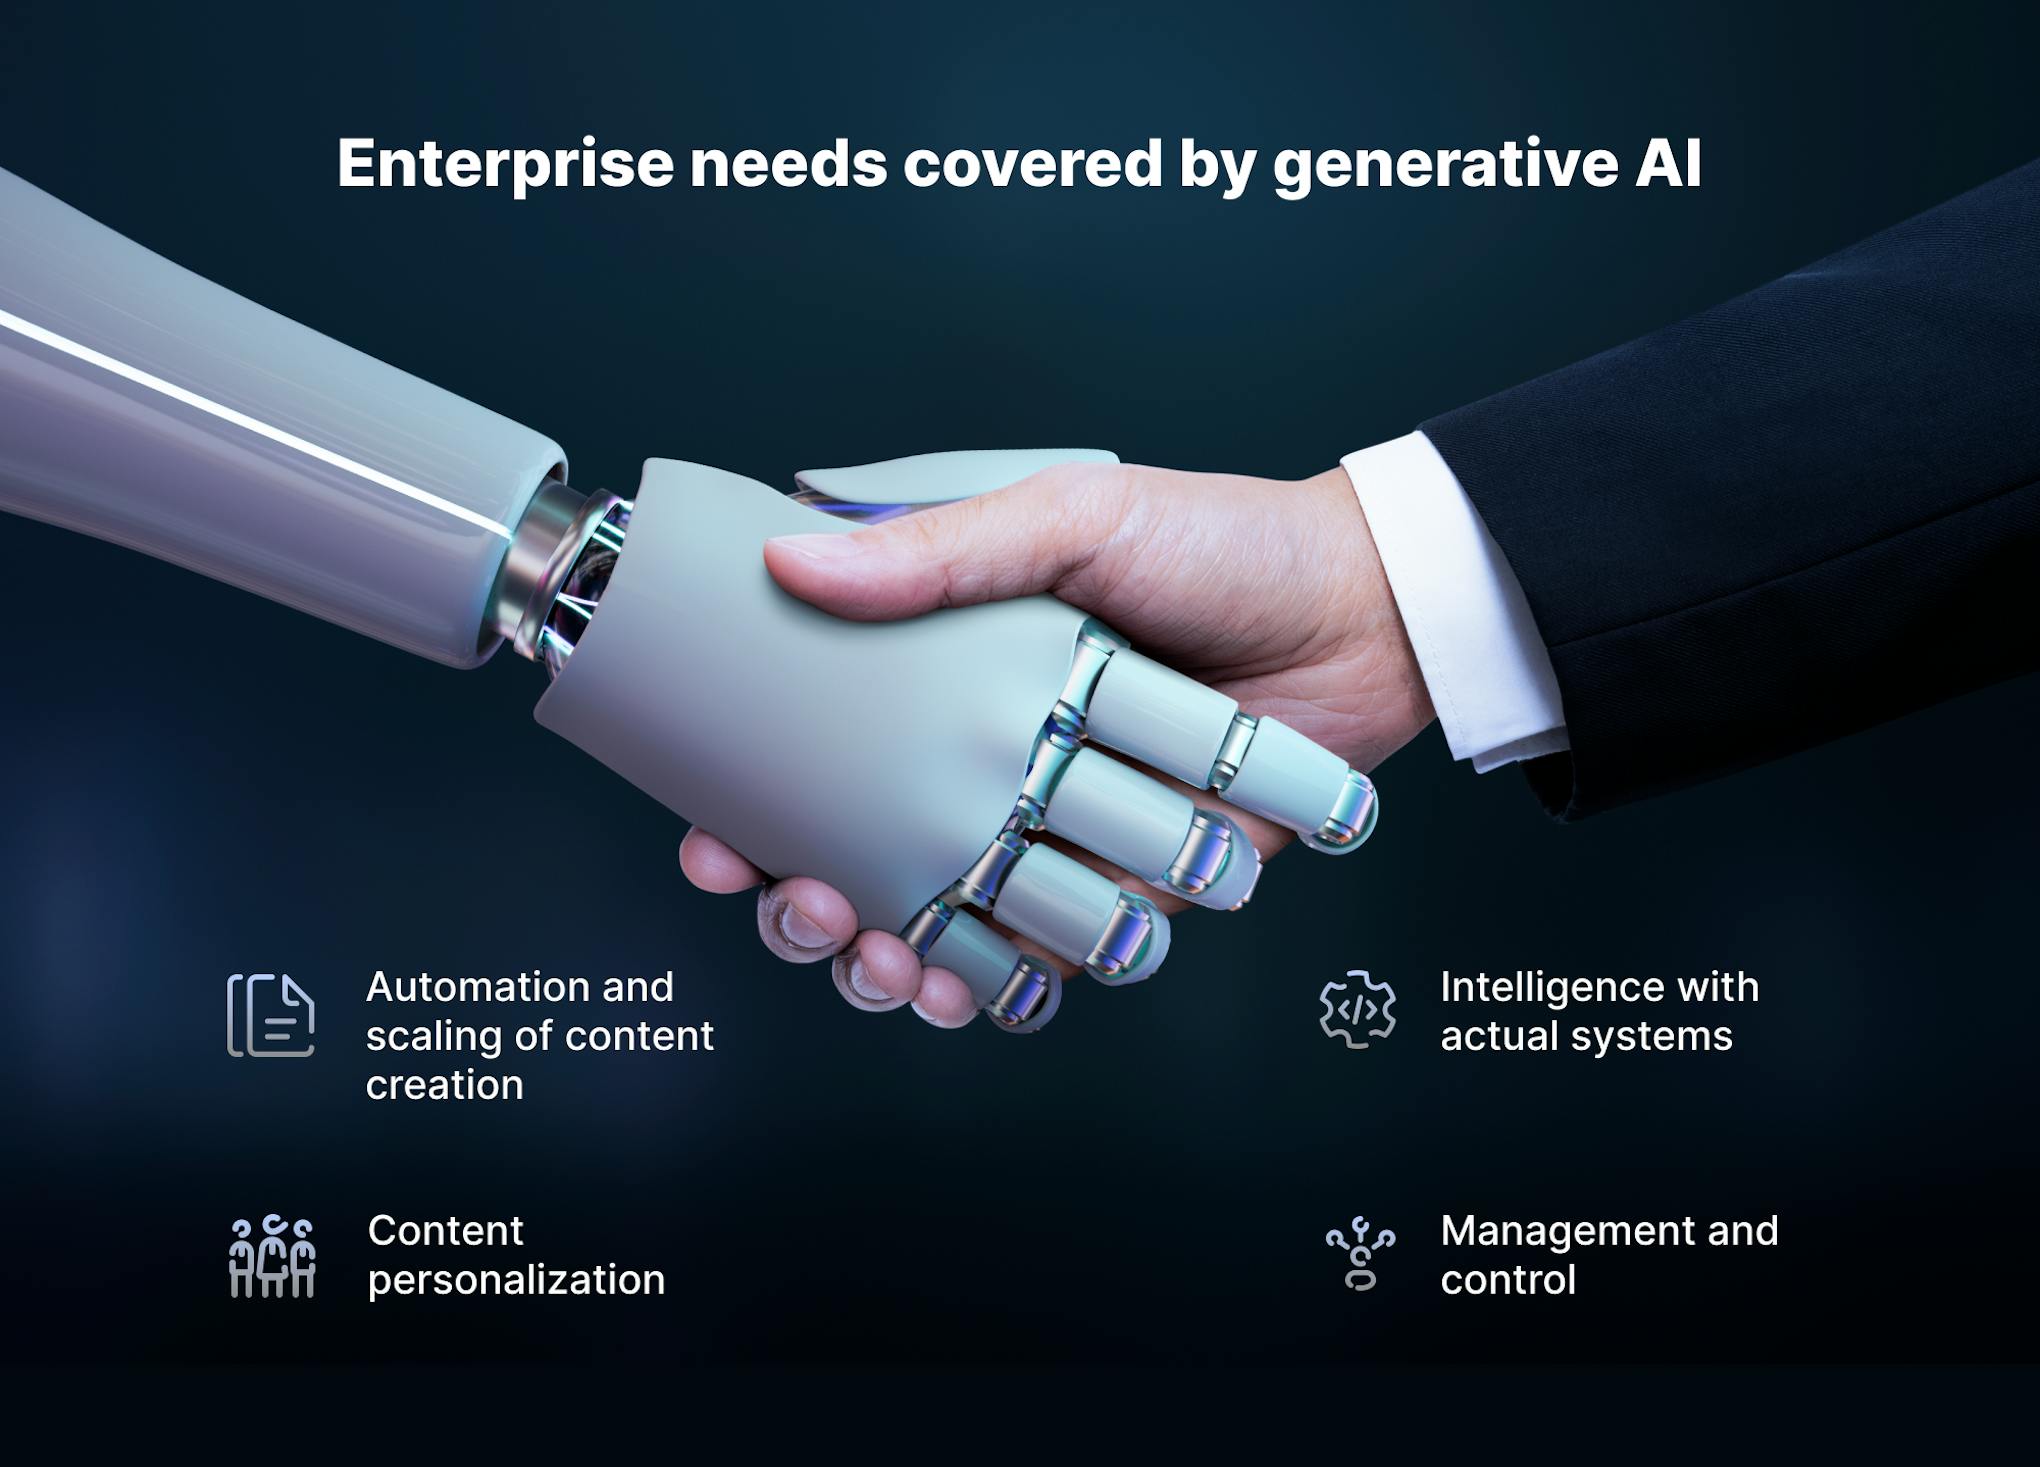 Enterprise needs covered by generative AI